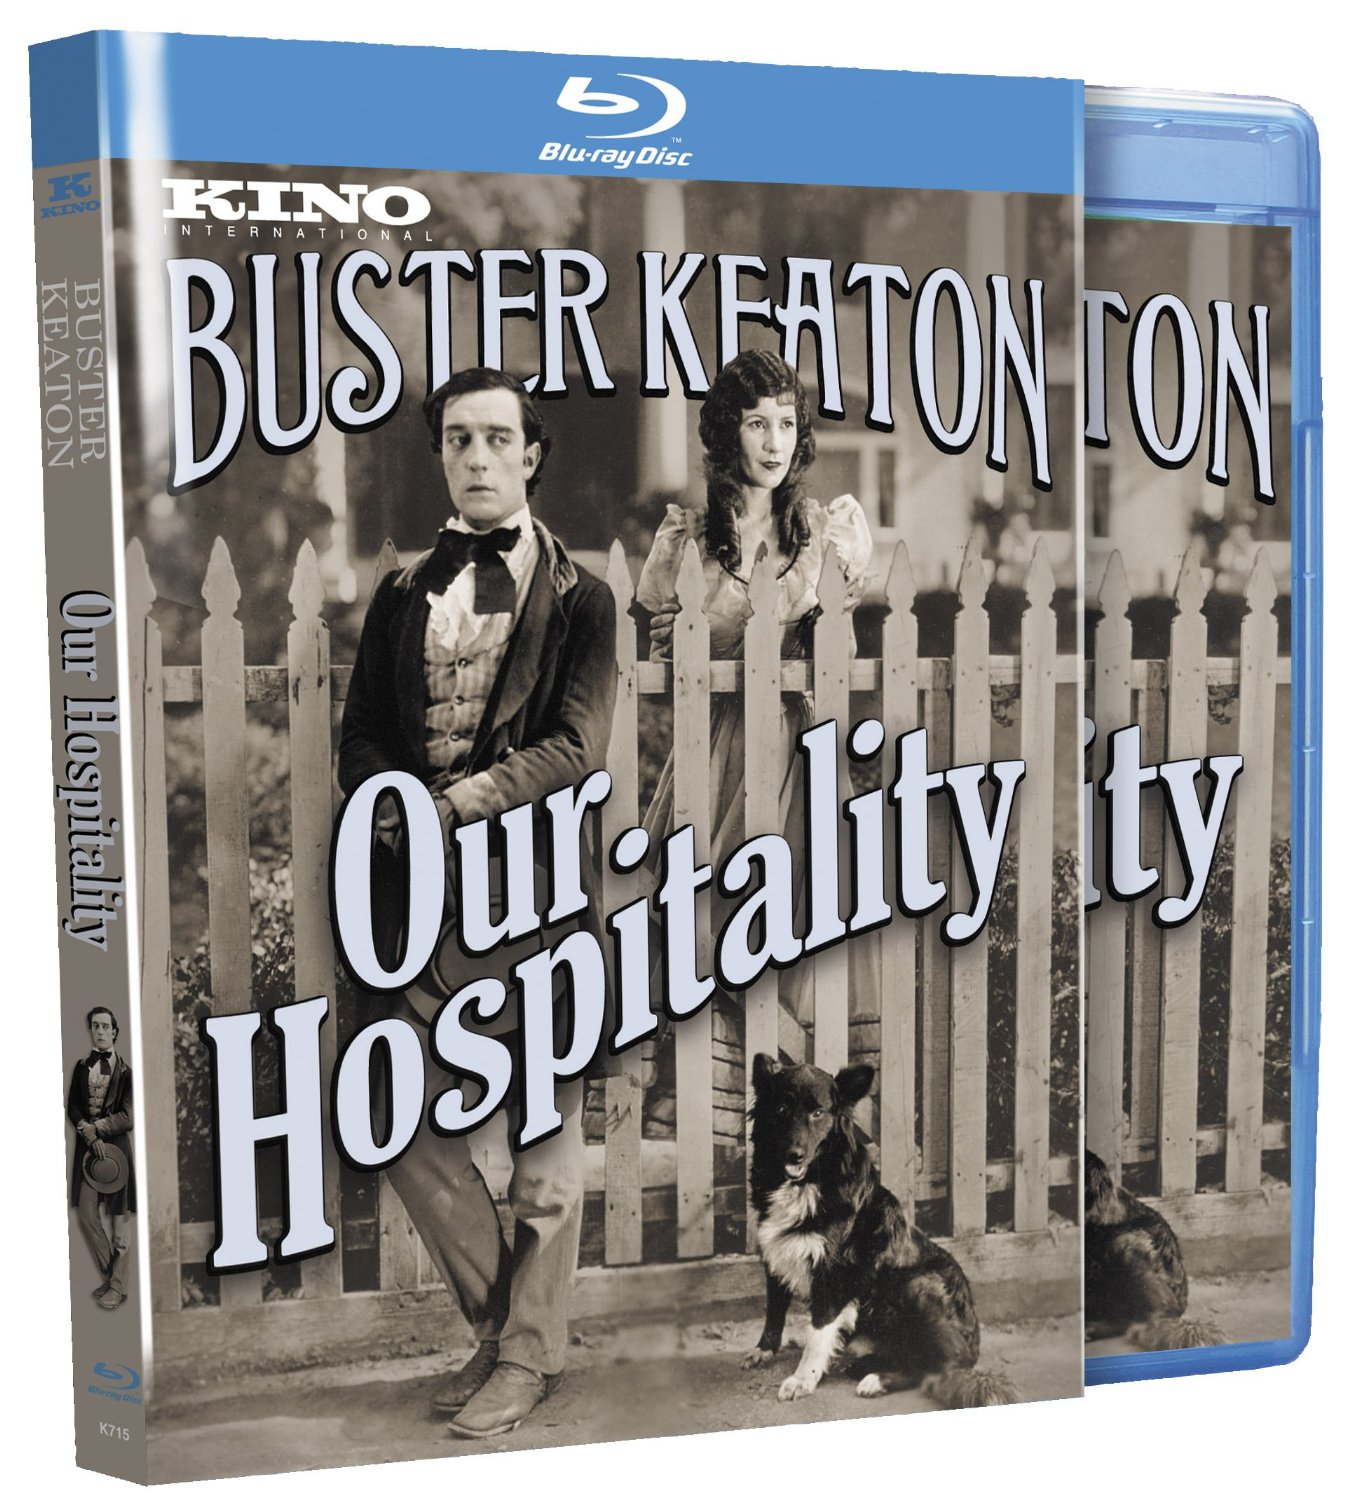 Our Hospitality, starring Buster Keaton and Natalie Talmadge